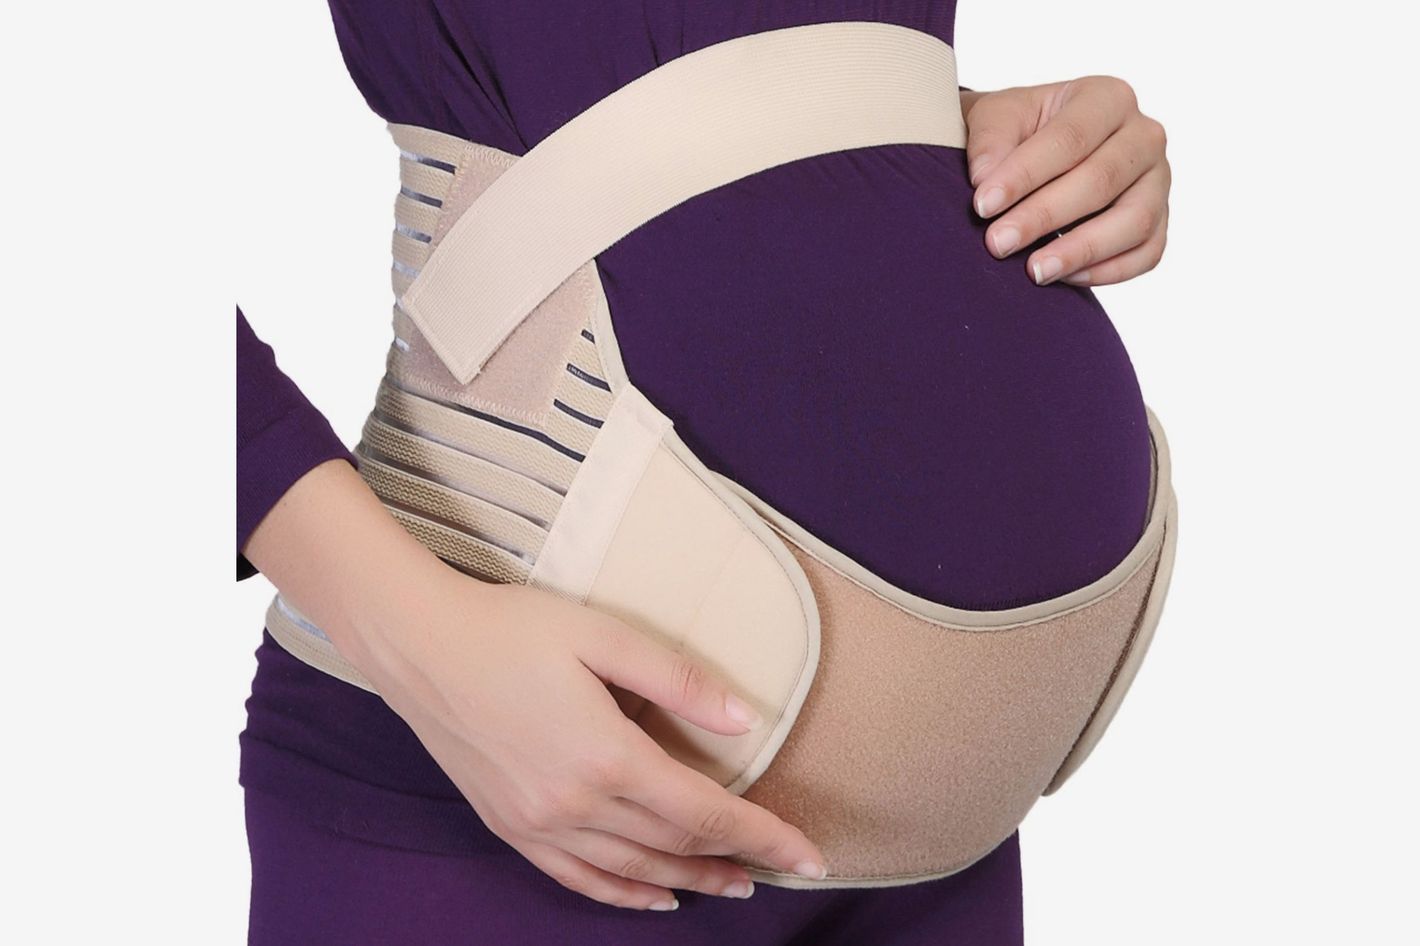 Pregnancy Maternity Support Belt Pelvis Pain for Back/Pelvic/SI/SPD/PGP Pain 